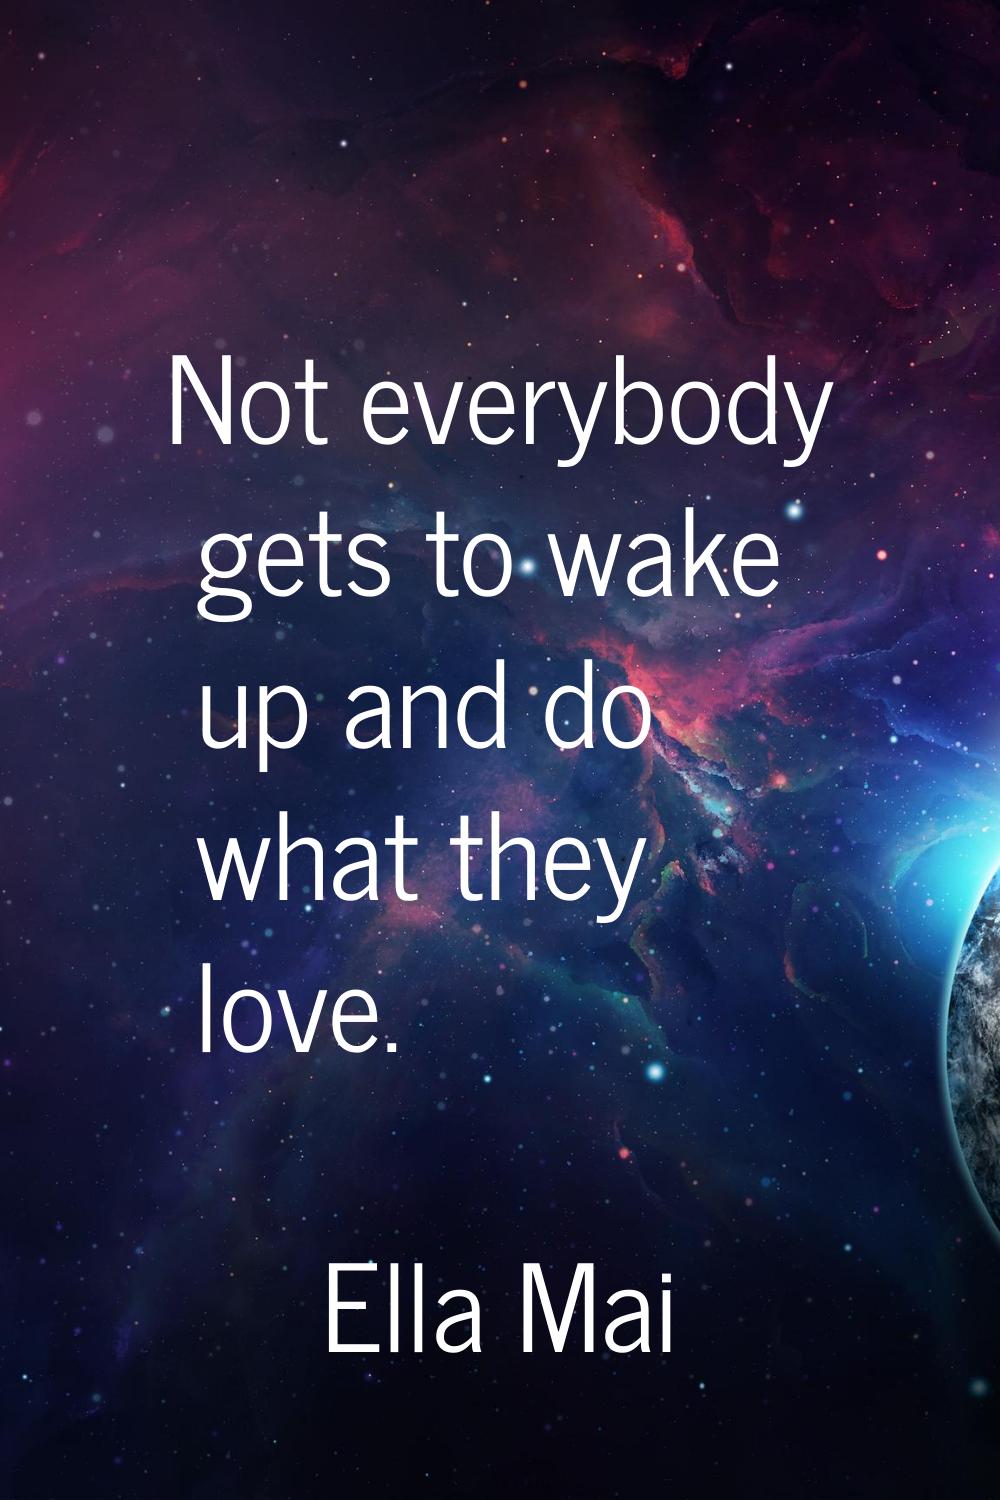 Not everybody gets to wake up and do what they love.